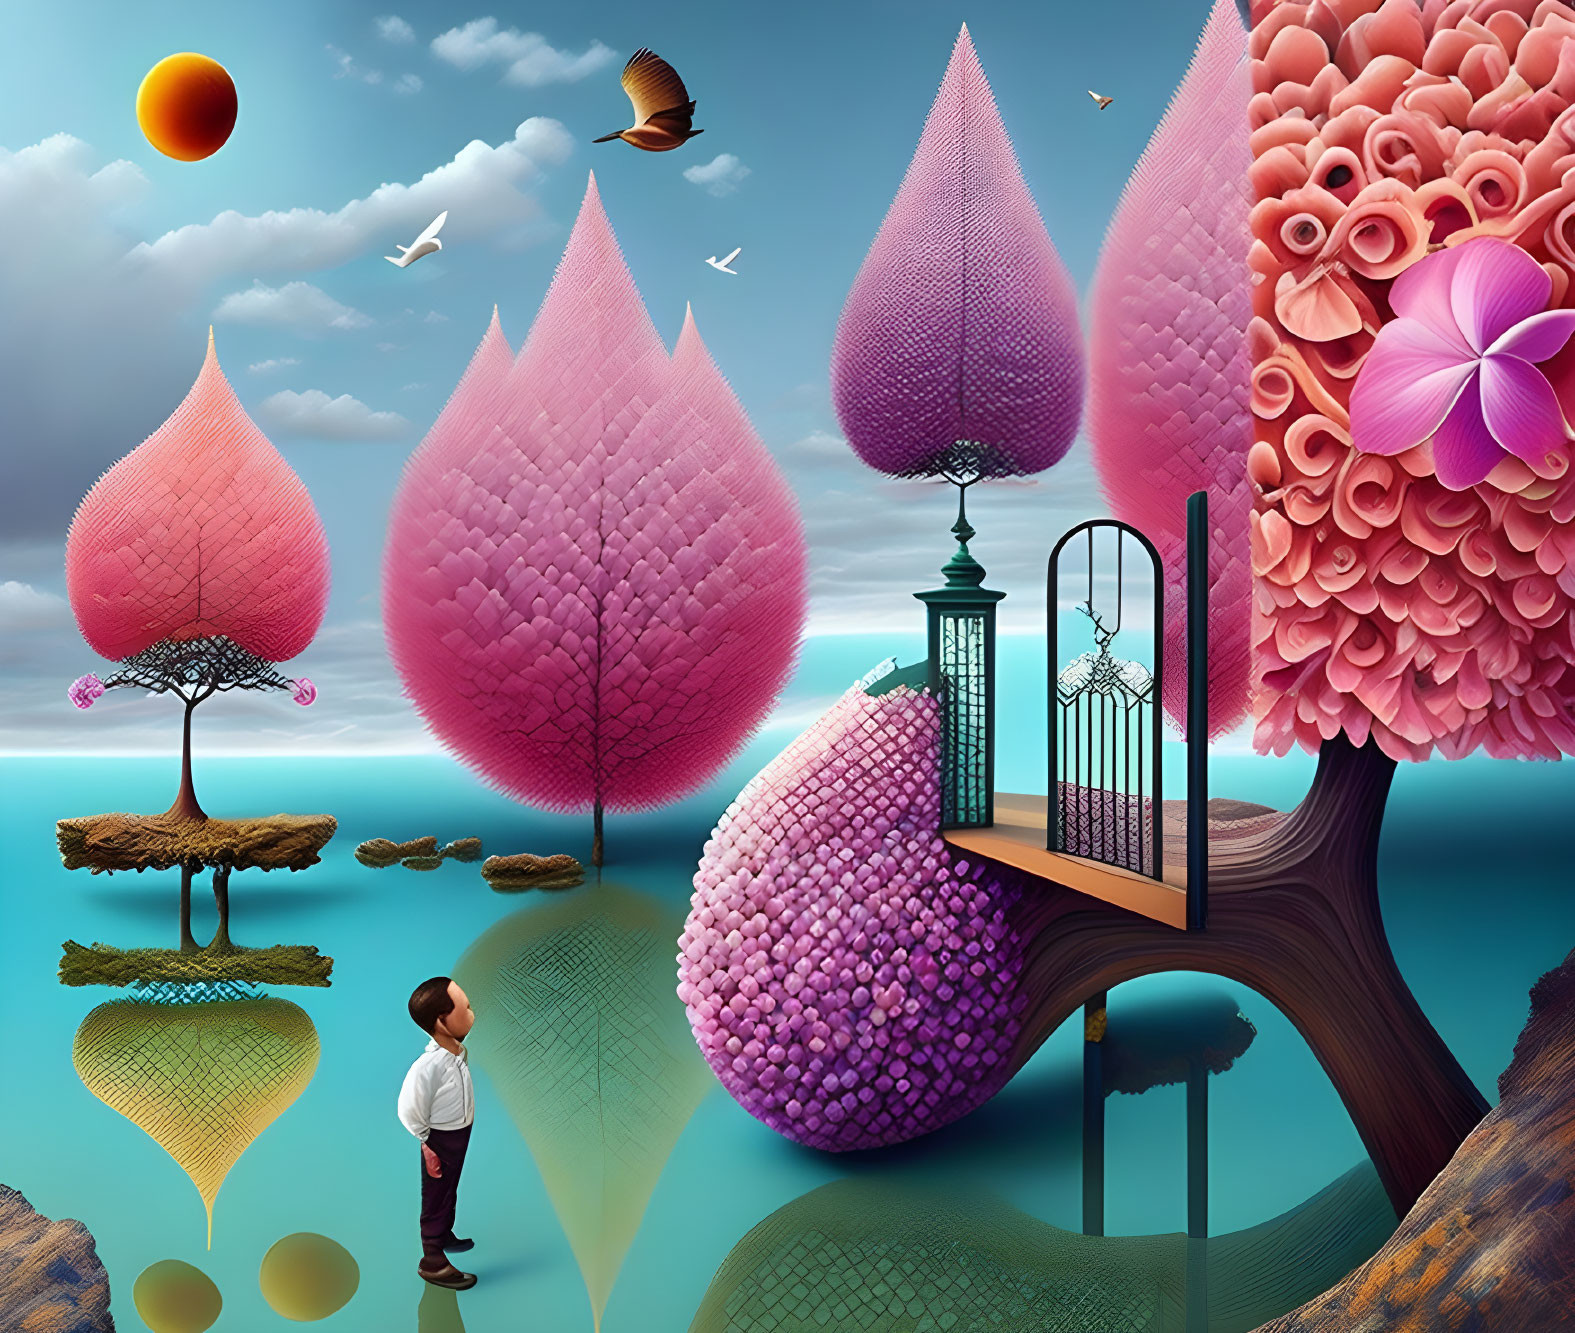 Colorful landscape with geometric tree-like structures, floating island, staircase, and vibrant flora.